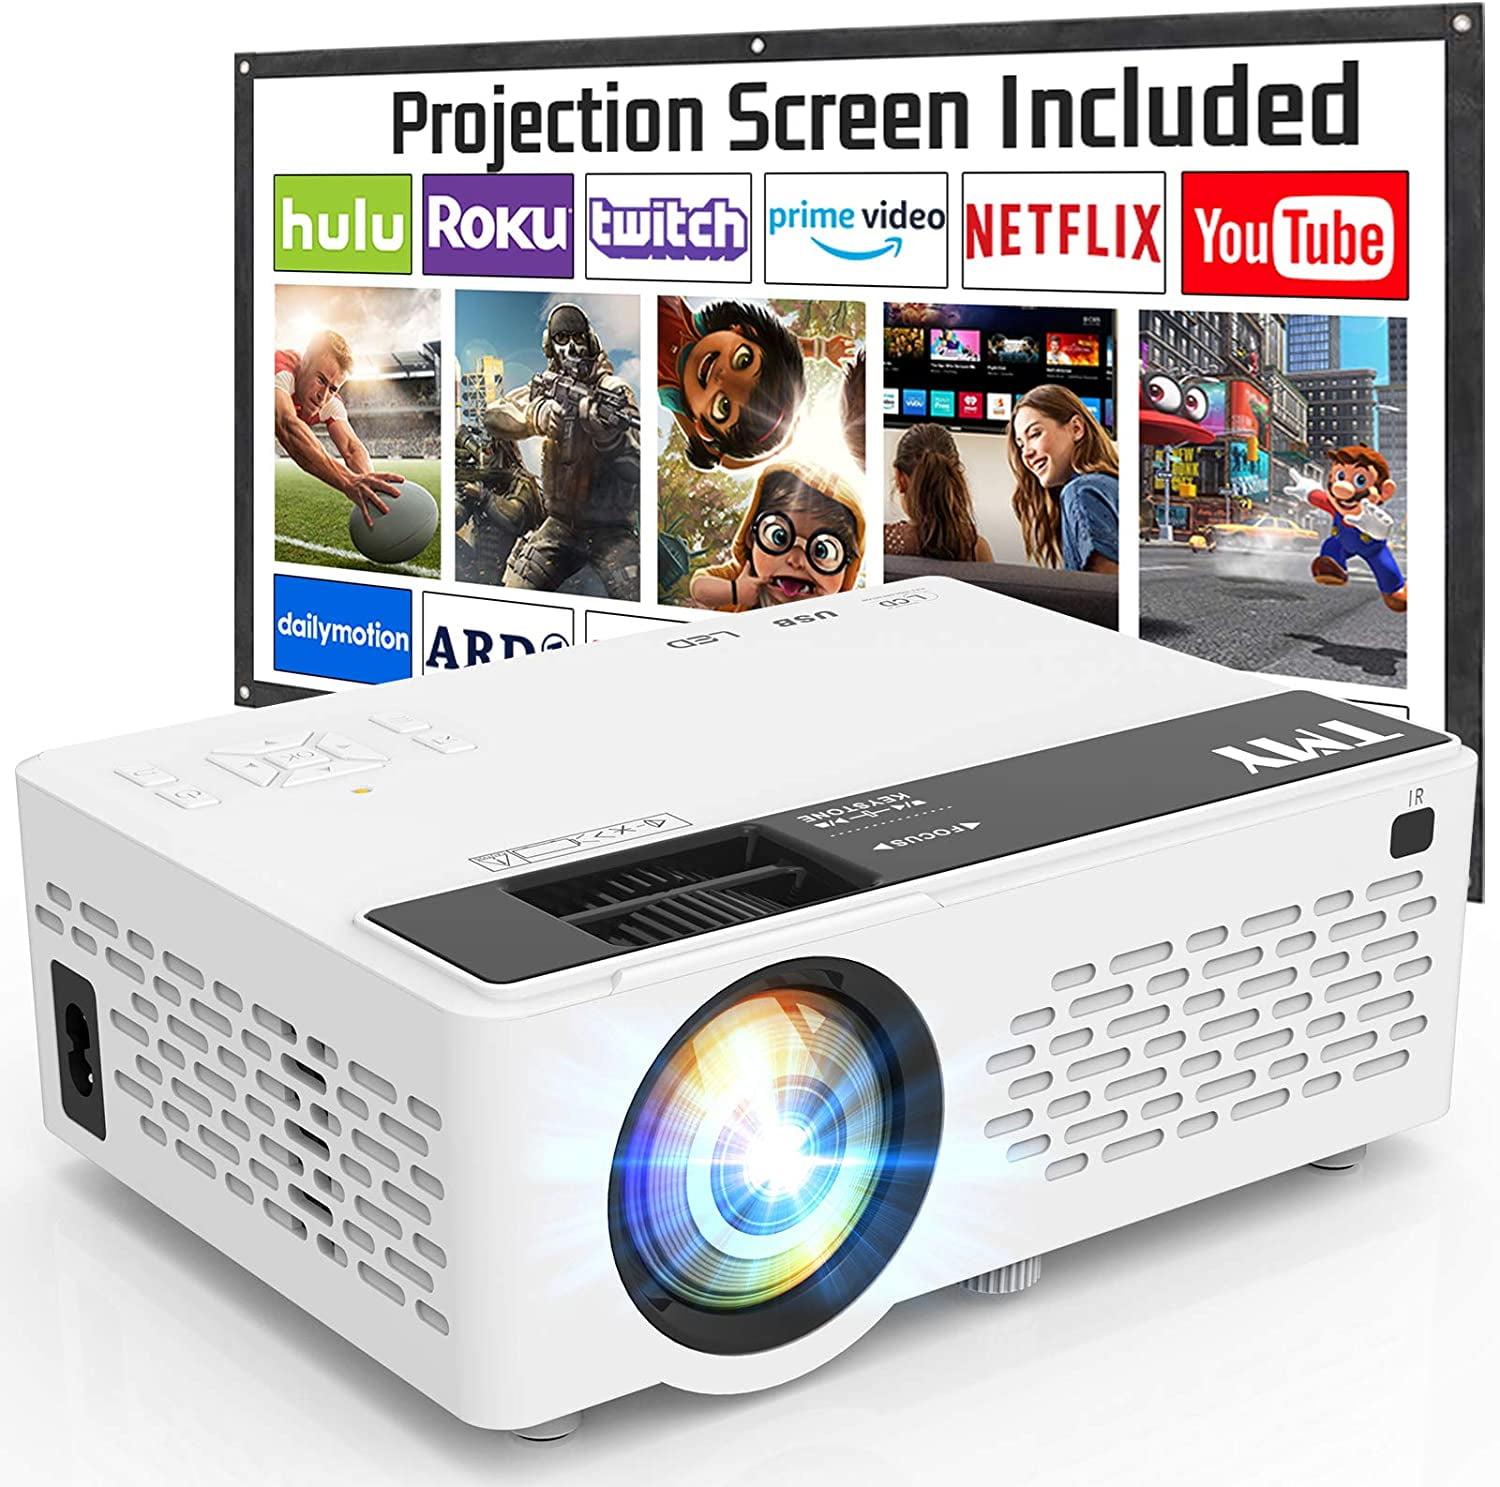 Native 720P Portable Projector 1080P Supported Outdoor Movie Projector 7500Lux,Compatible with HDMI VGA USB TF AV for Home Mini Projector with Screen 100 Inch 